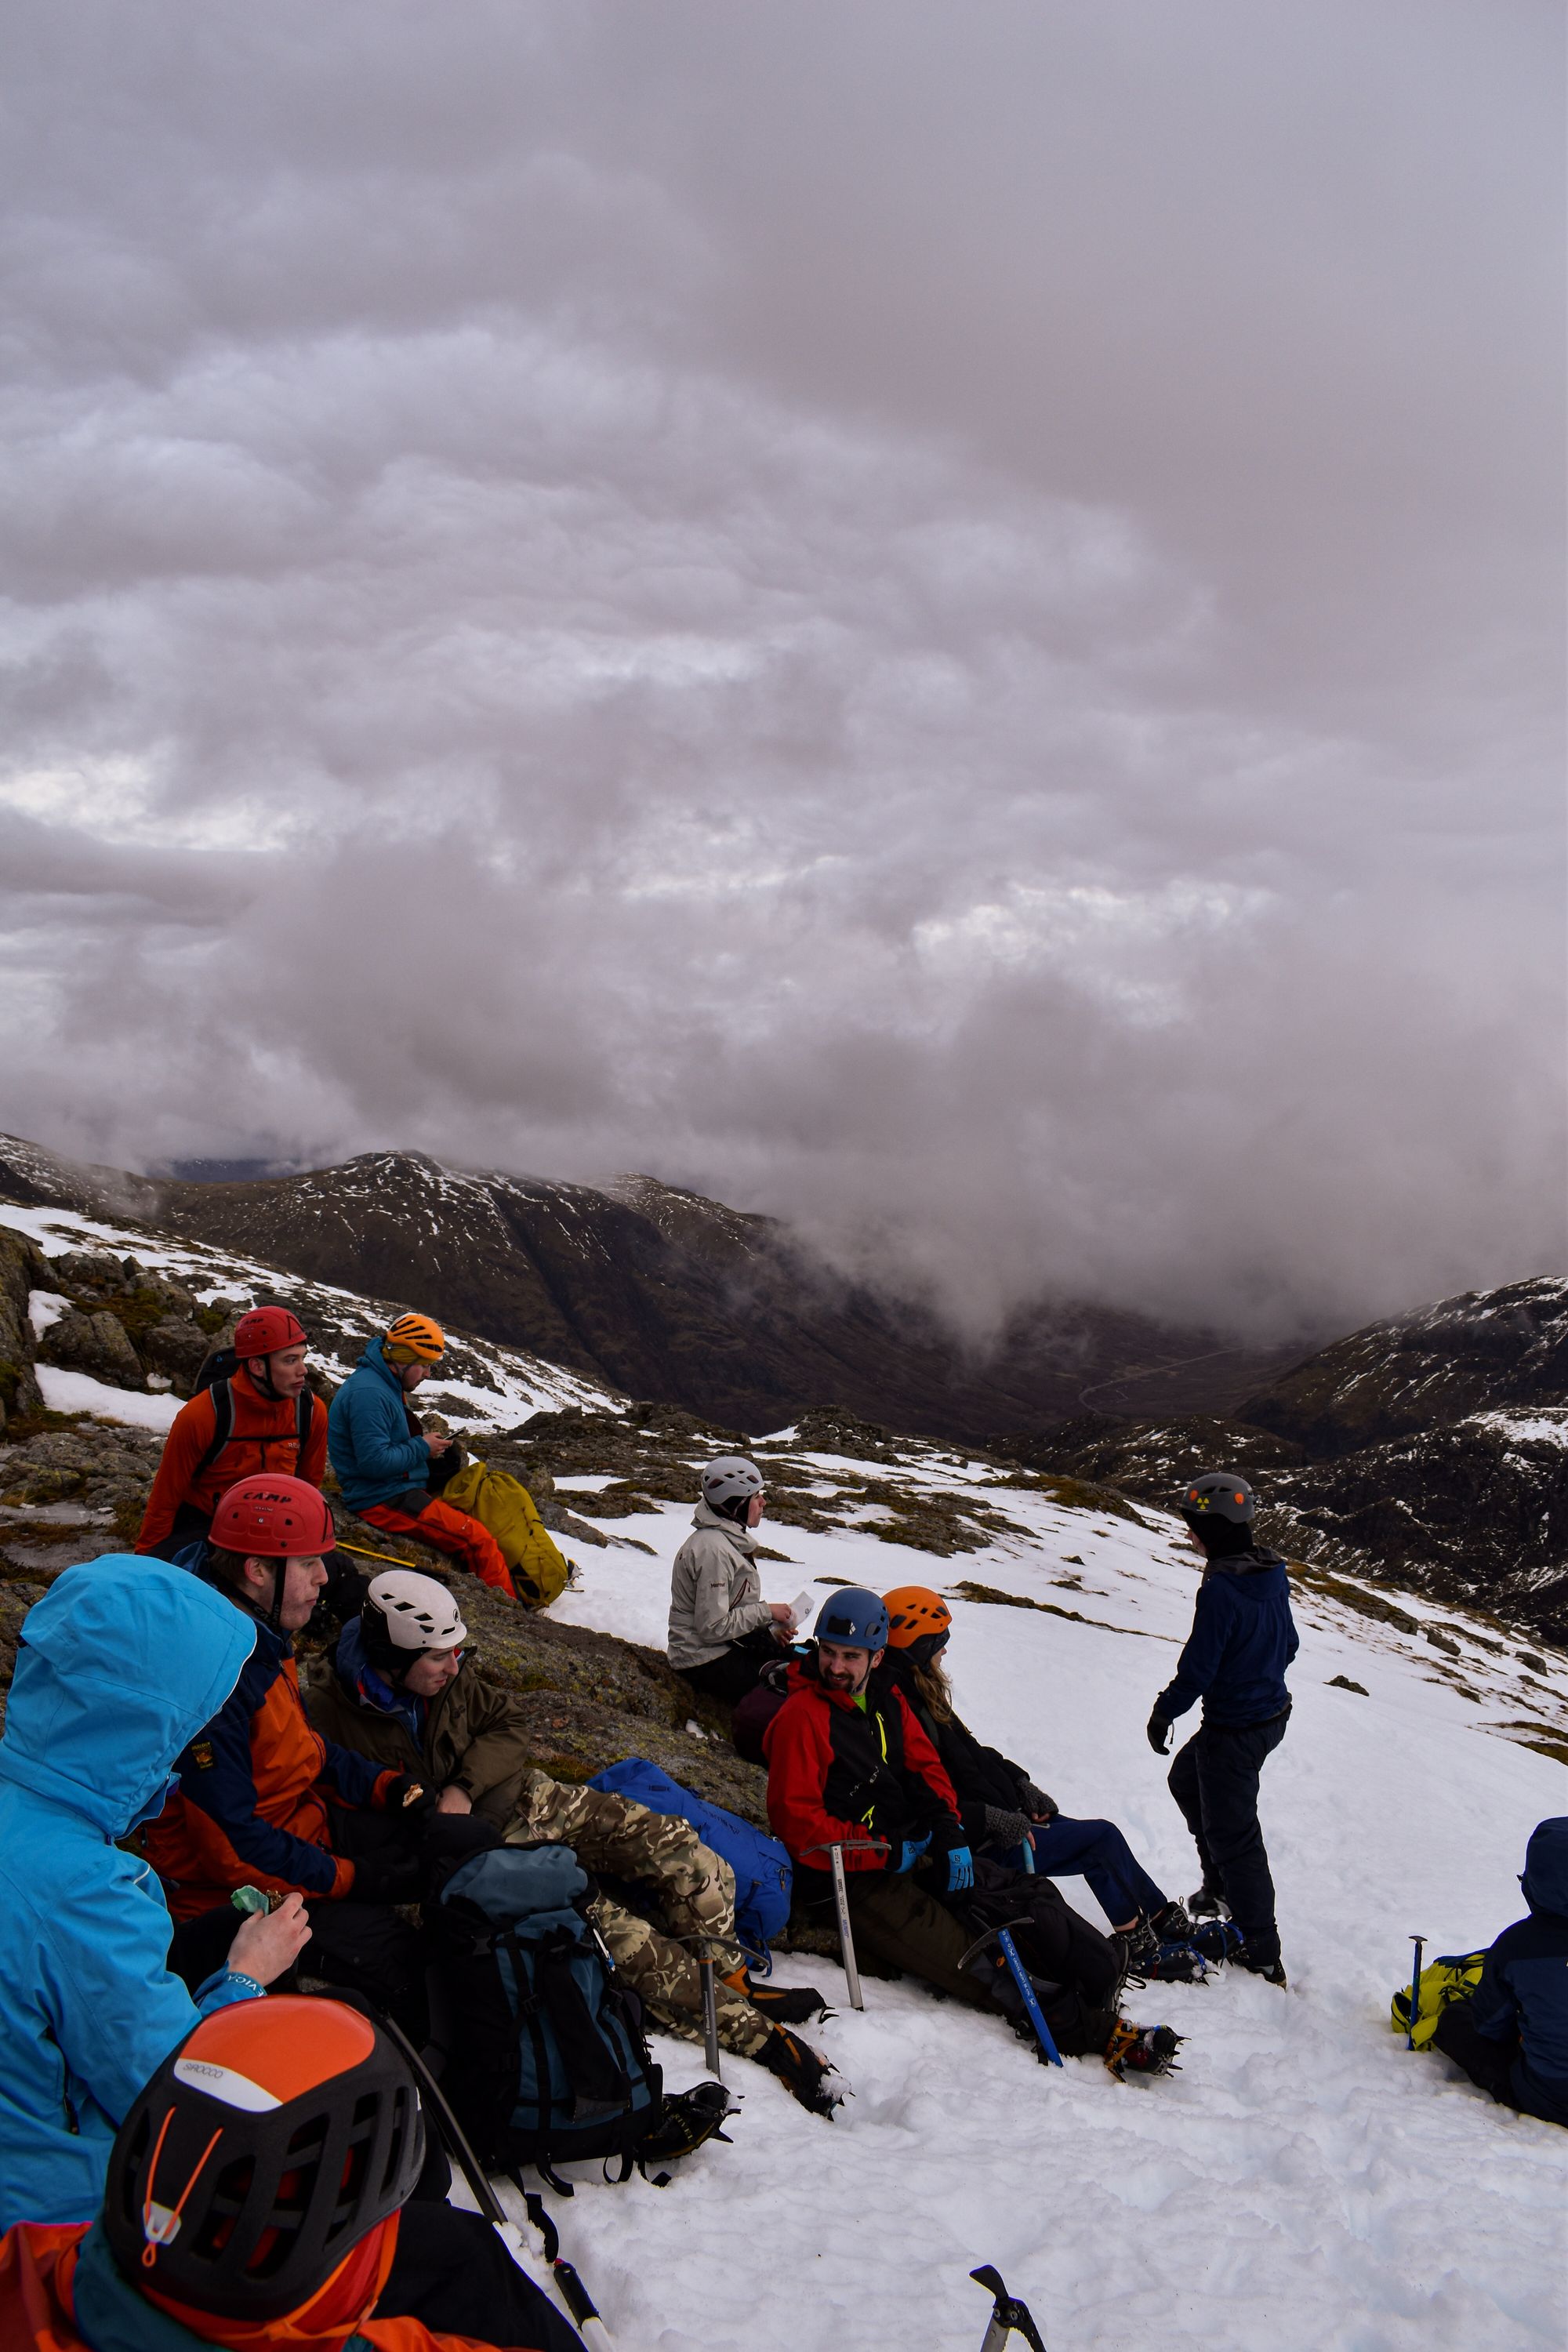 A group of people on a snowy mountain

Description automatically generated with medium confidence